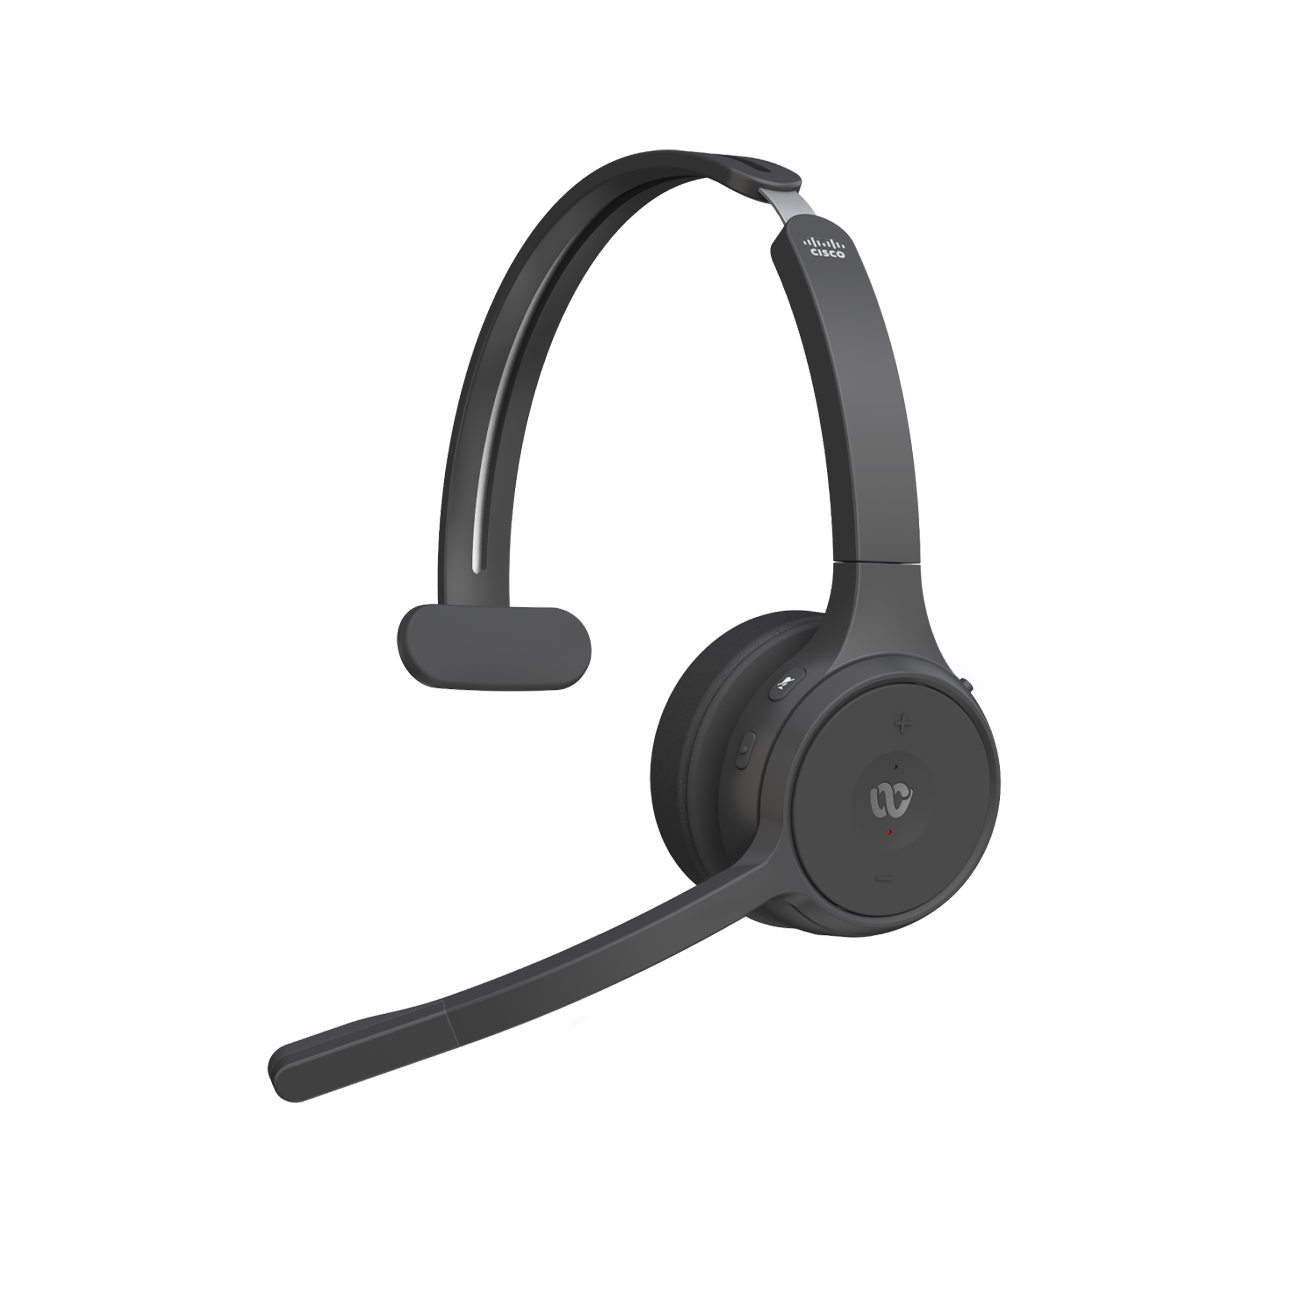 The Cisco Headset 720 Series in the Carbon color (black).  Screen shows time of 9:54 and apps like Meetings and Call.